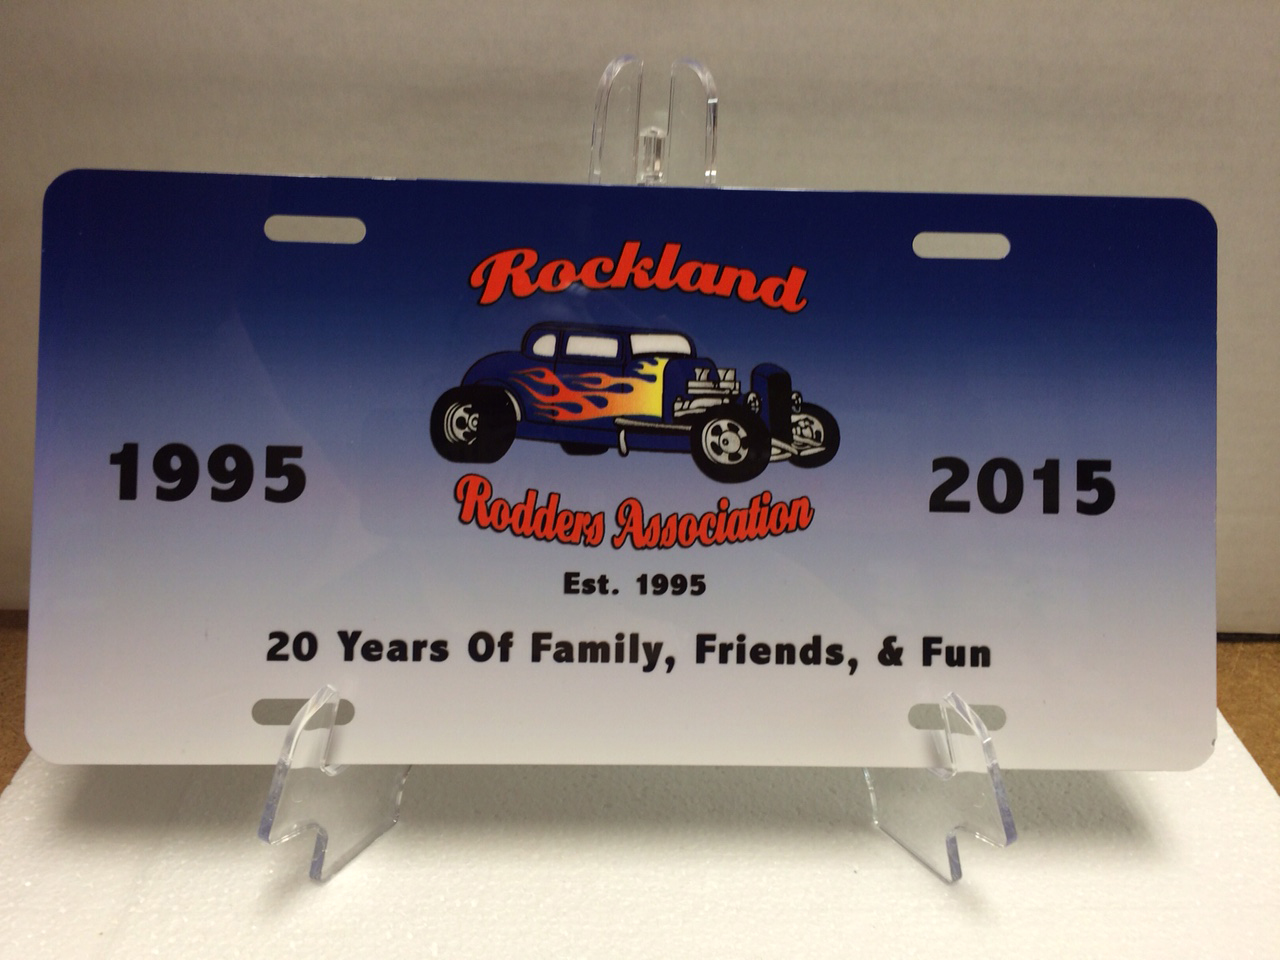 Rockland Rodders 20th Anniversary Plate made with sublimation printing